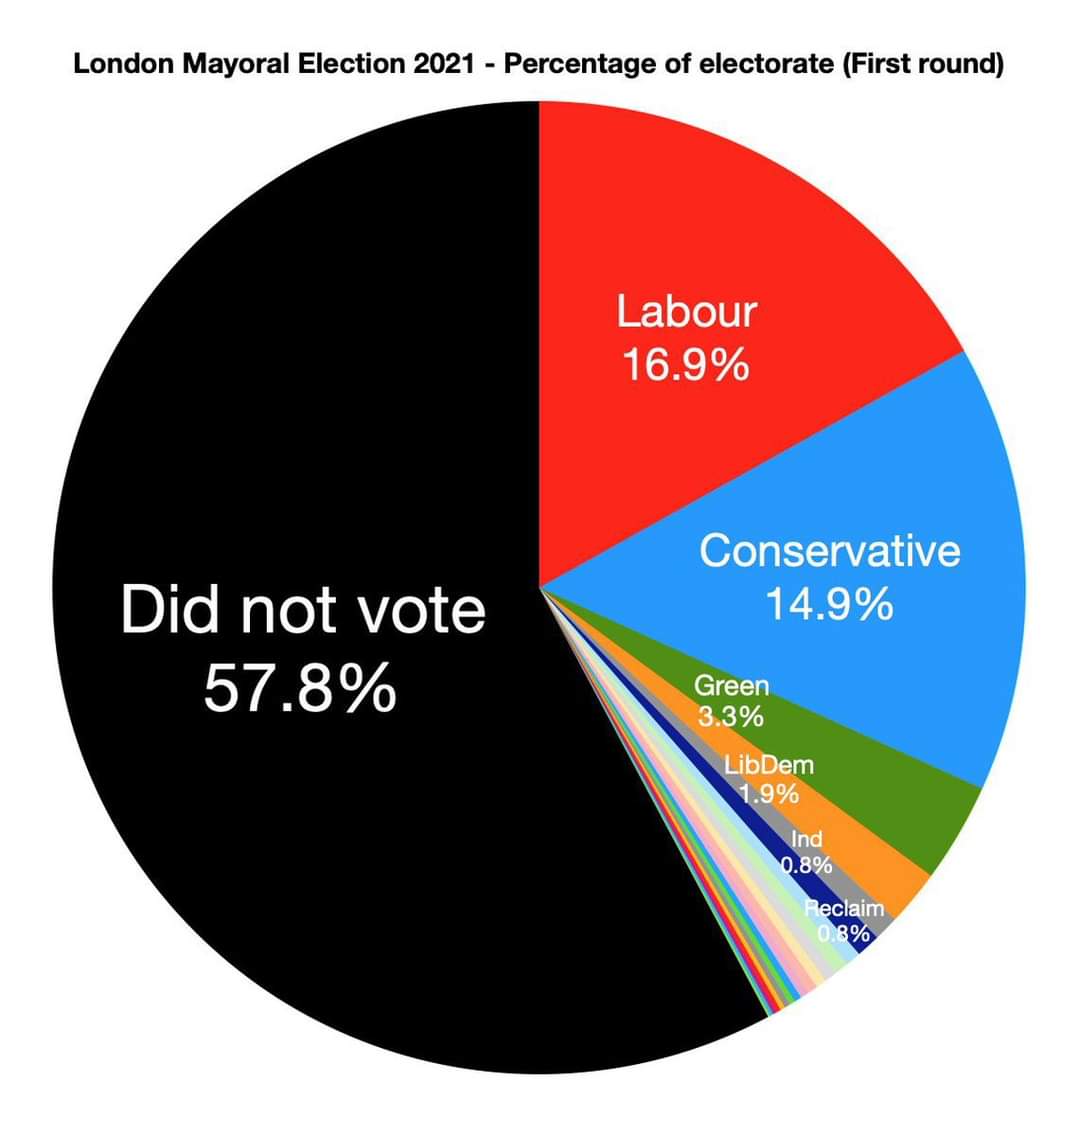 Mayor & Assembley elections this Thursday, in London.

#UseYourVote, because in 2021, only 42% bothered to vote; thus your vote can really count, so GET OUT & VOTE this Thursday 7am-10pm!

#KhanOut #May2nd #KnifeCrime #MurderCapital #ViolentCrime #Khanage #LondonDeservesBetter